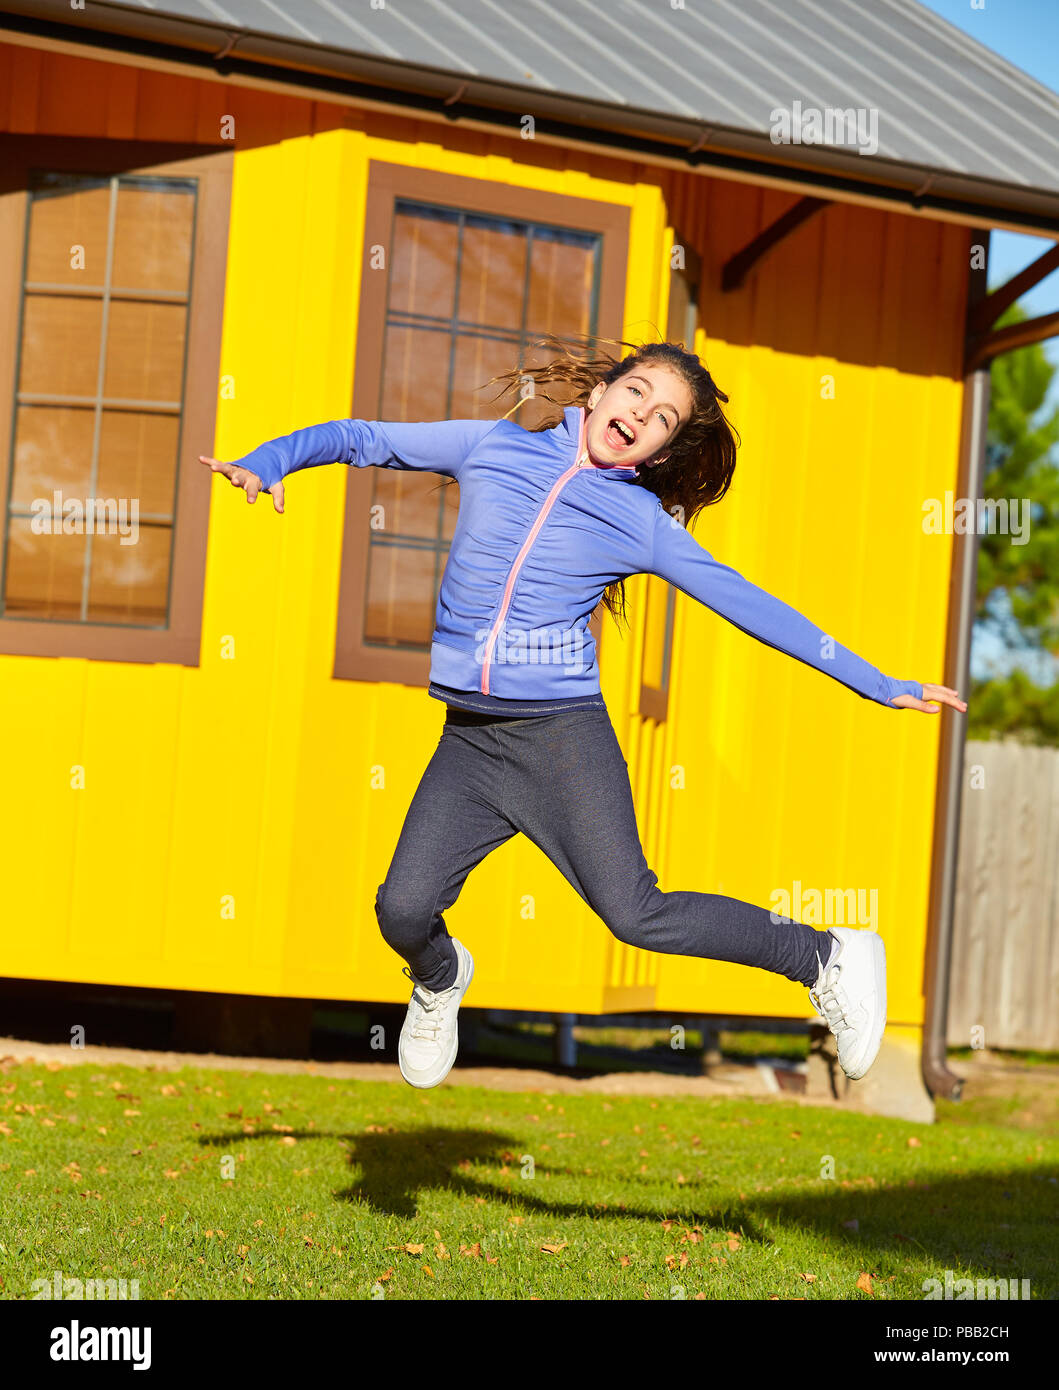 Teen girls in the park junping and having fun outdoors in sunny day Stock Photo